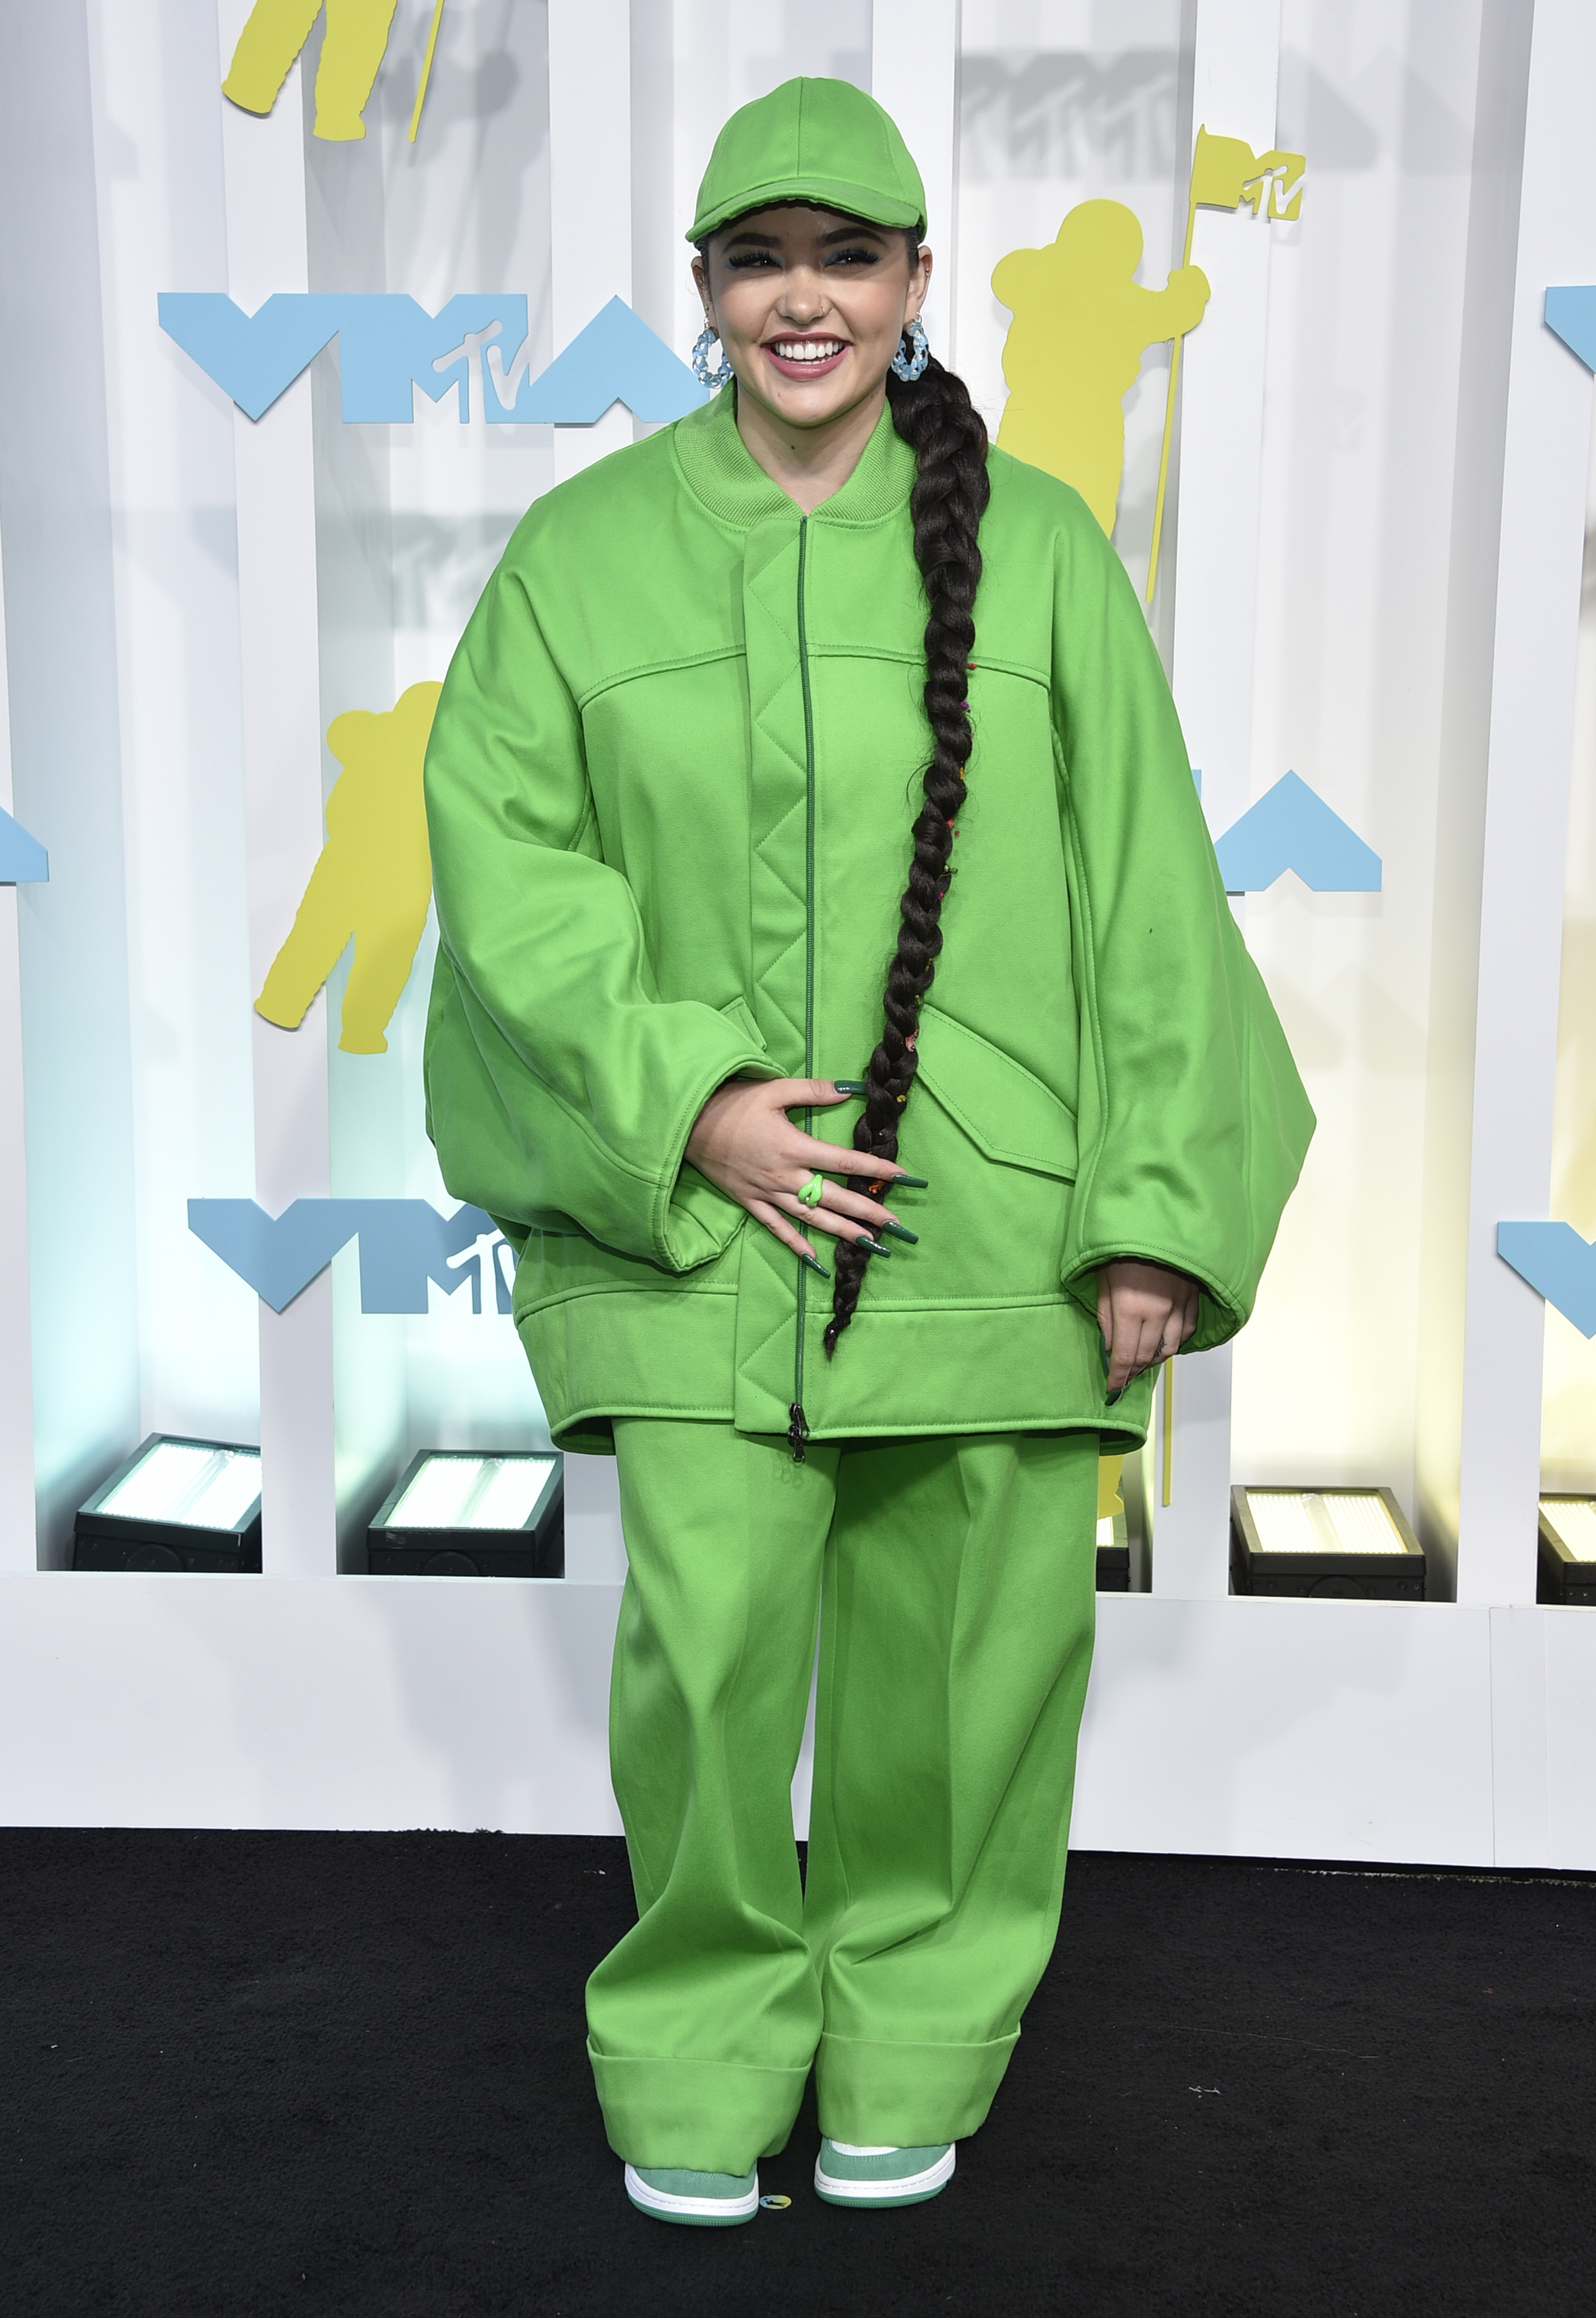 lauren spencer-smith poses and smiles on vmas arrivals carpet wearing full length oversized green track suit and matching cap